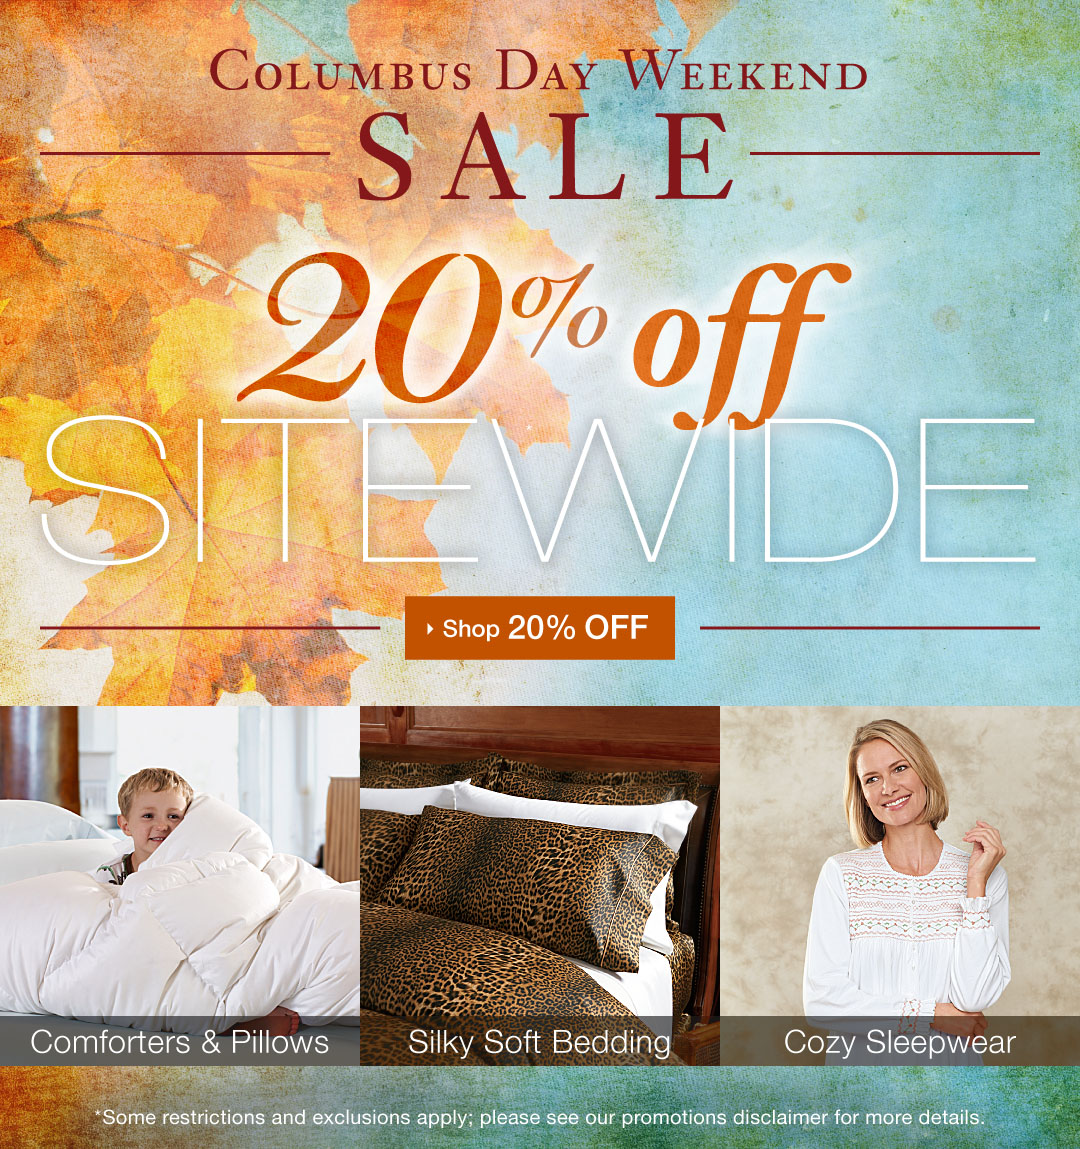 Save 20% sitewide at cuddledown.com